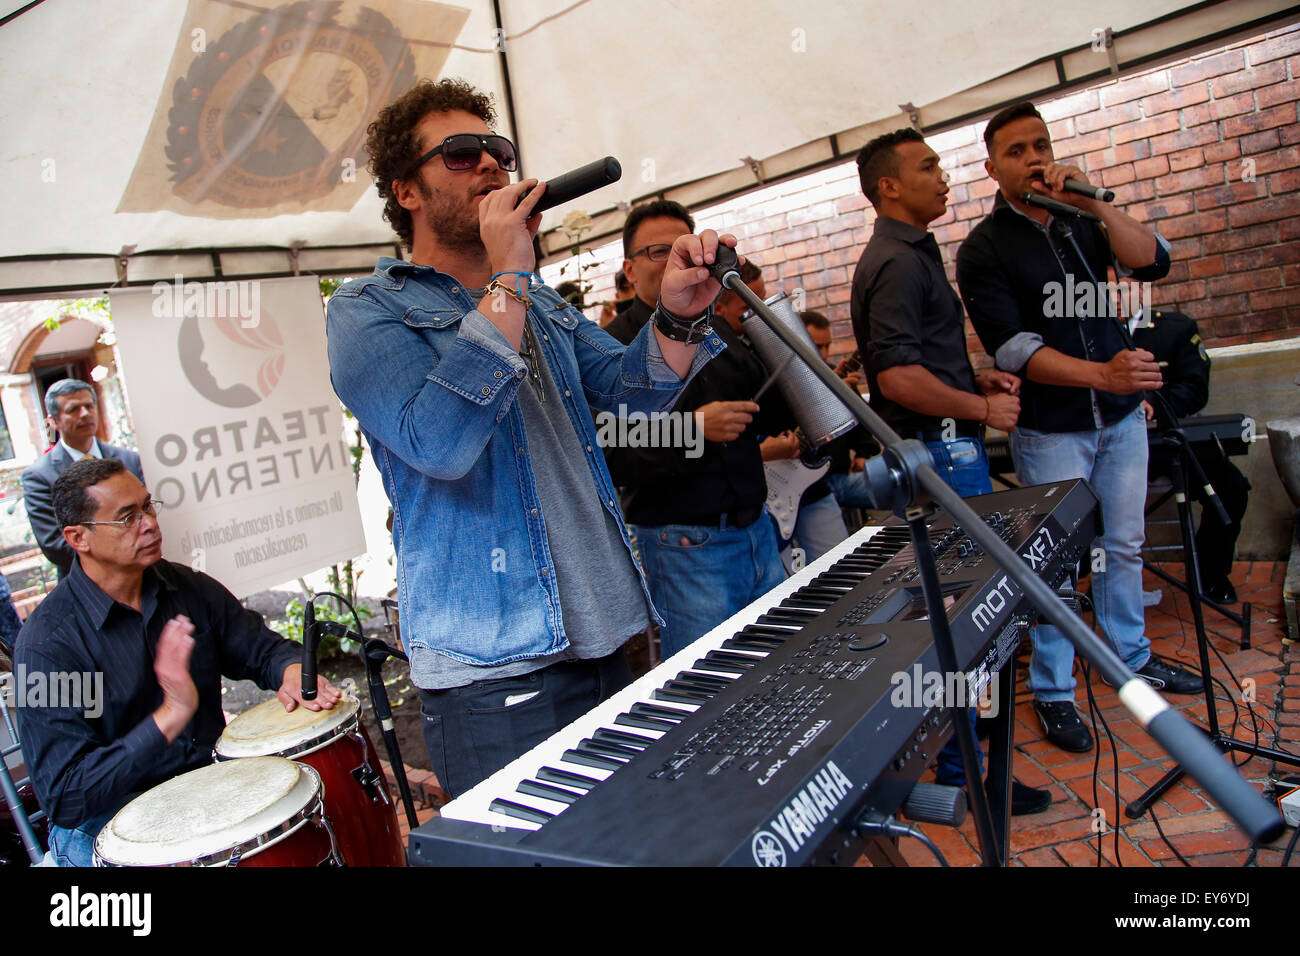 Bogota, Colombia. 22nd July, 2015. Singer Andres Cabas (2nd L, front), and musicians from prisons perform during the inauguration of 'Casa Libertad' (Freedom House), in Bogota, Colombia, on July 22, 2015. 'Casa Libertad', an initiative of the Internal Theater Foundation, the Ministry of Justice and the National Penitentiary and Prison Institute (INPEC, for its acronym in Spanish), is a space for the attention of the Colombian prison population that has left prisons, according to local press. © Mauricio Alvarado/COLPRENSA/Xinhua/Alamy Live News Stock Photo